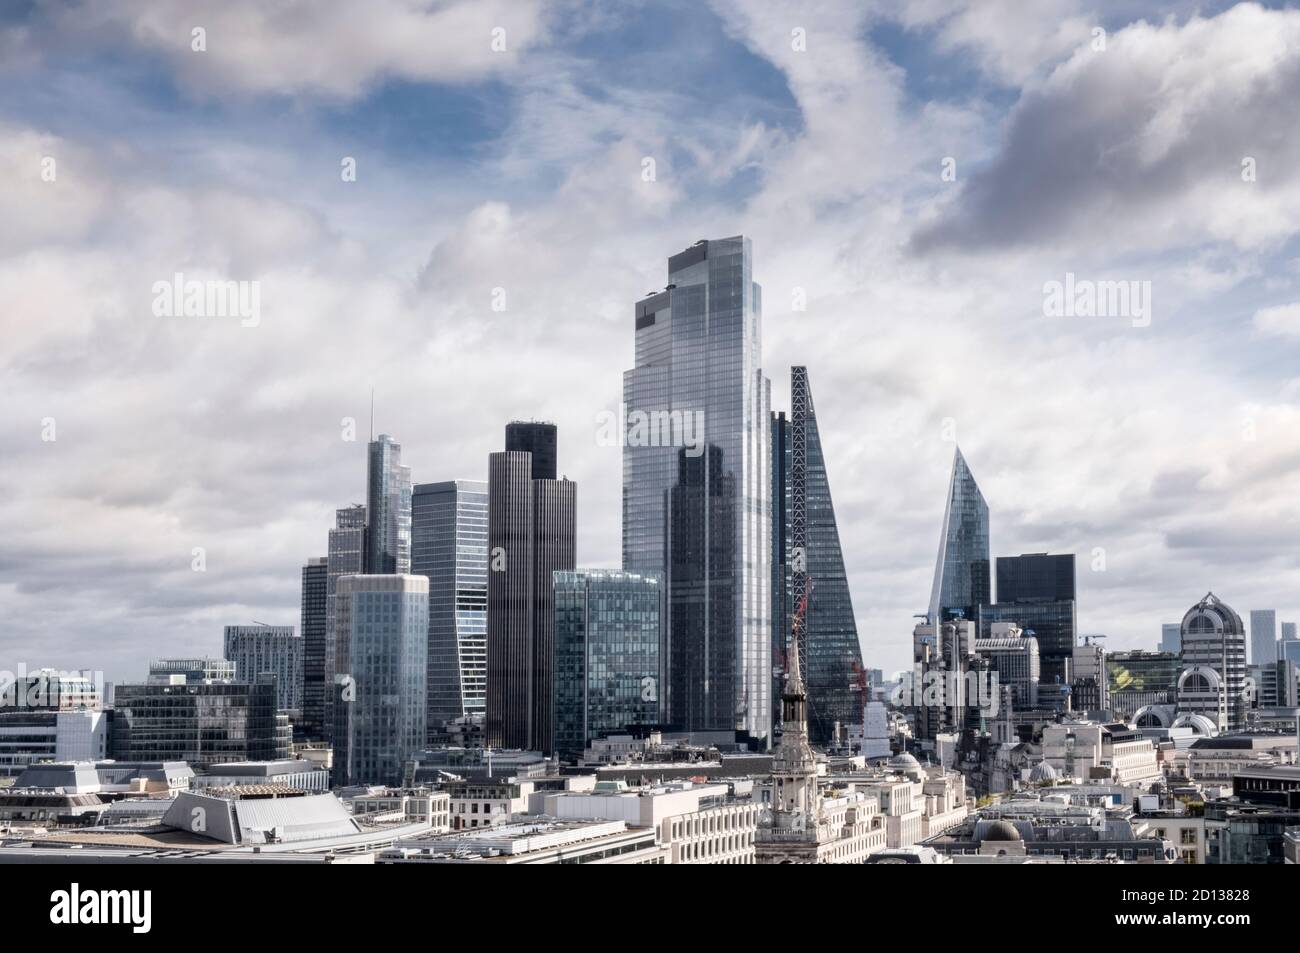 London's financial centre with 122 Leadenhall St. (the Cheesgrater), 22 Bishopsgate, The Scalpel (52 Lime Street) & commercial office buildings Stock Photo